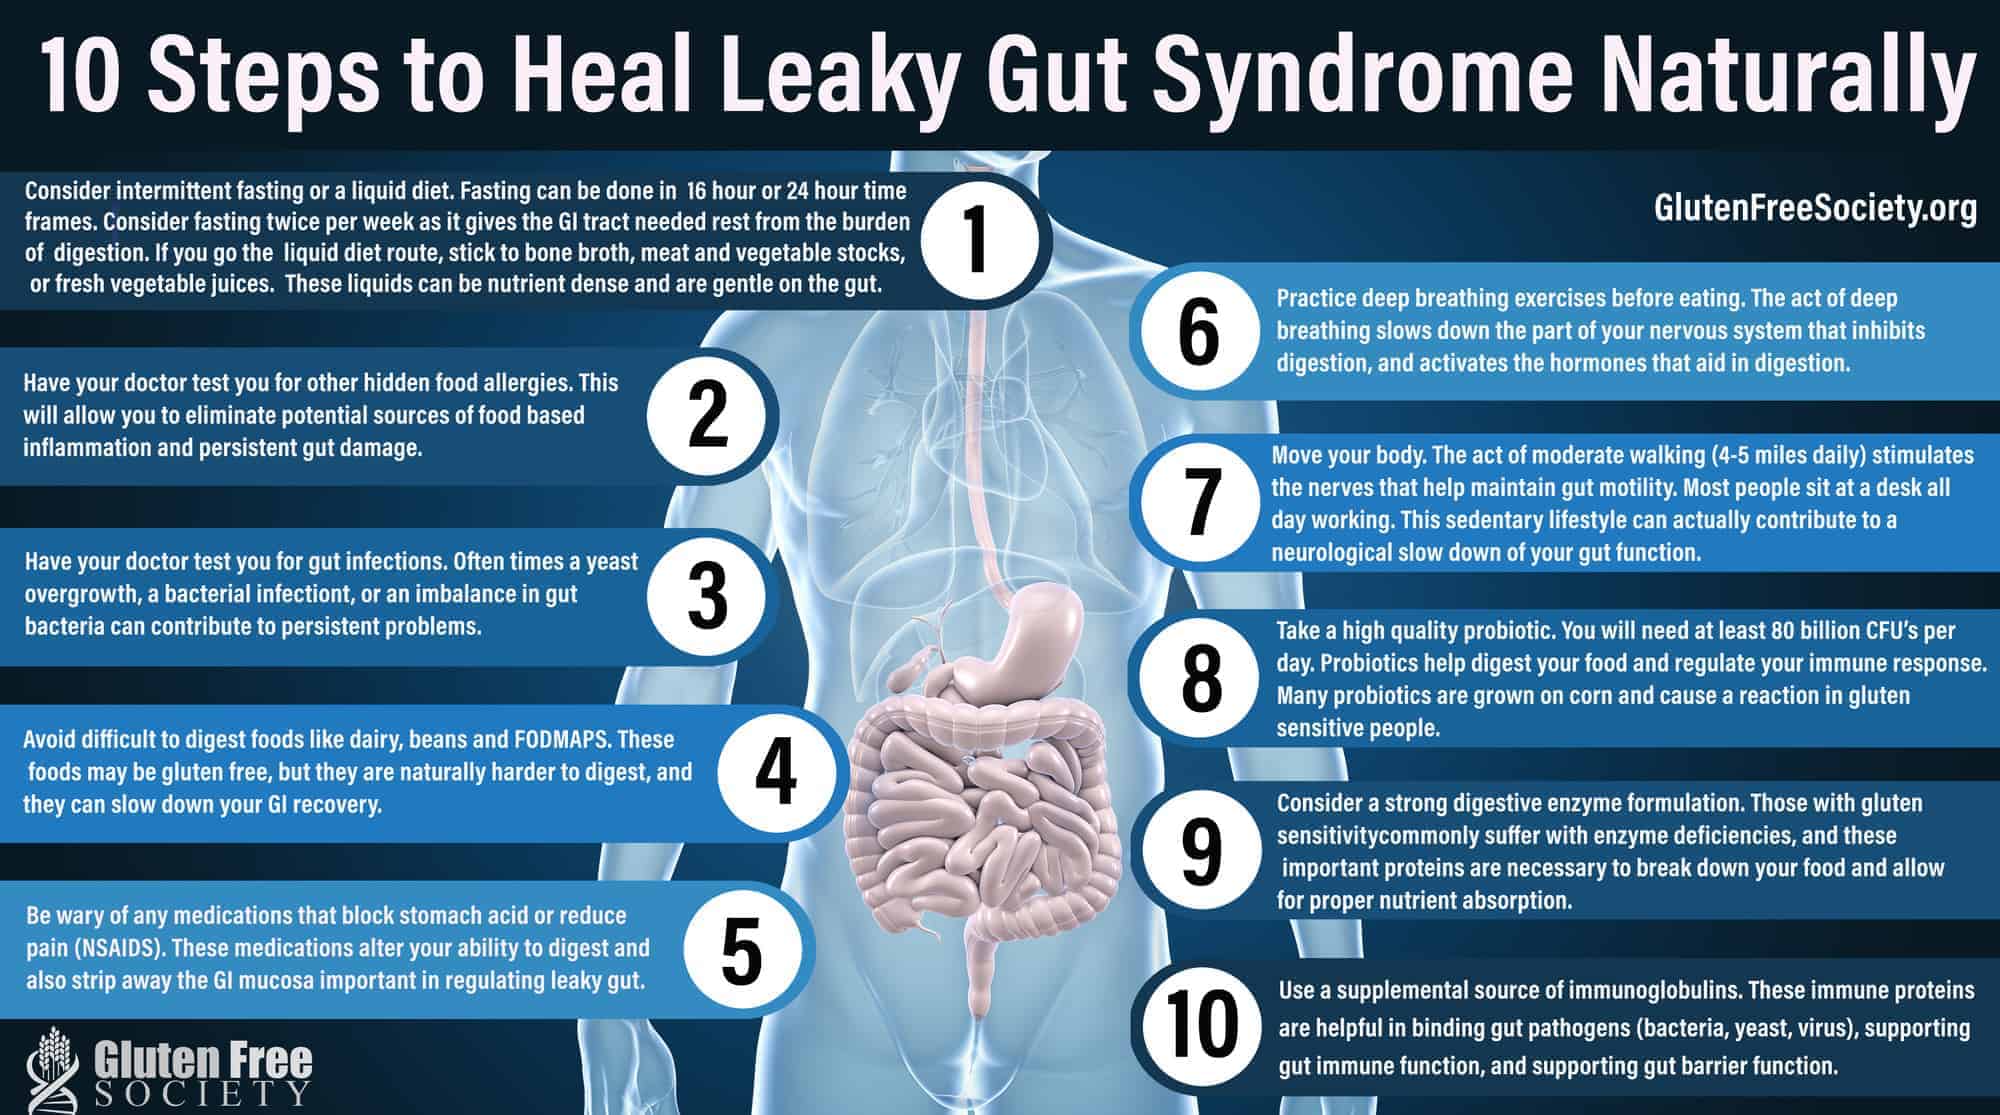 10 Steps to Heal Leaky Gut Syndrome Naturally